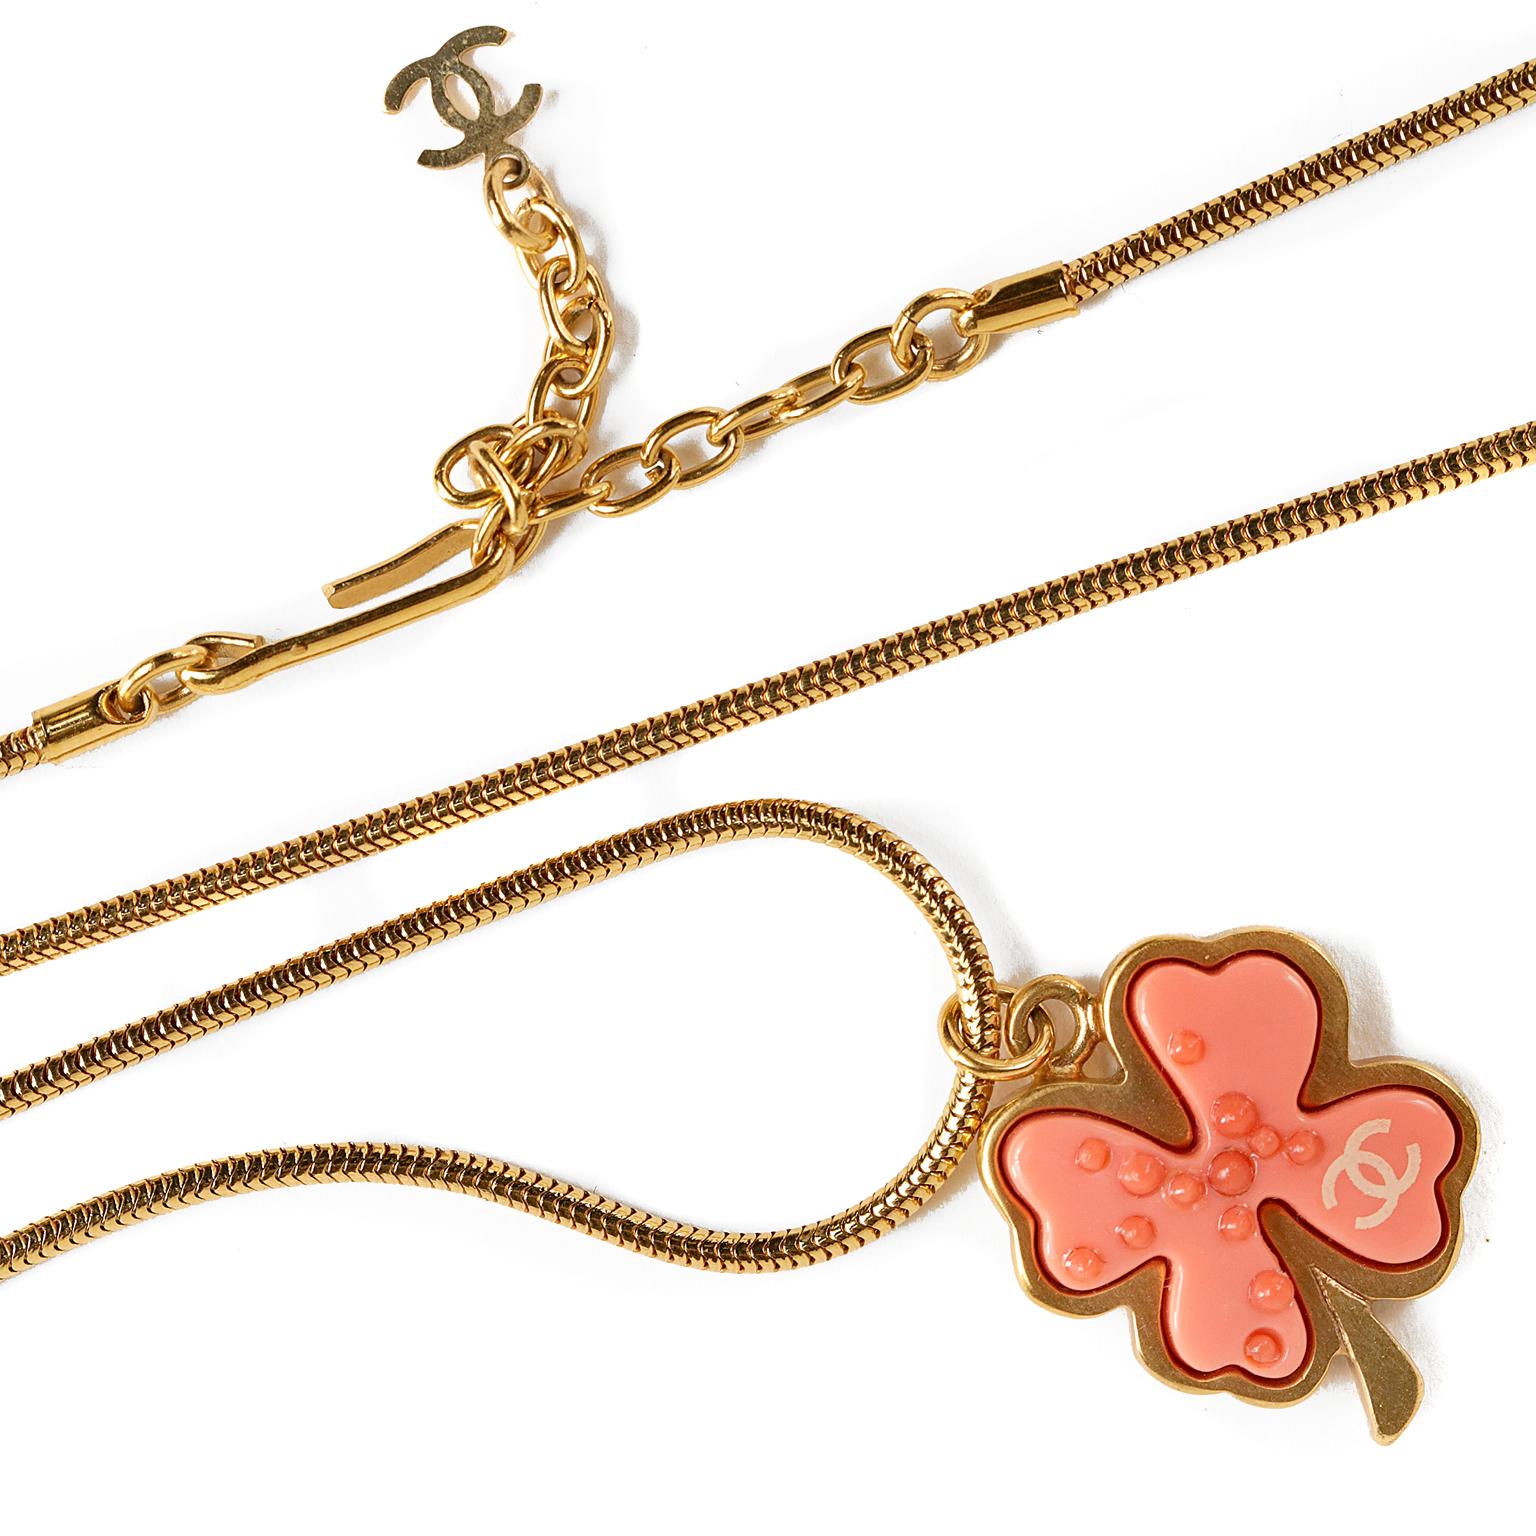 This authentic Chanel Coral Clover Necklace is in excellent condition from the 2005 collection.  Coral clover shaped pendant dangles from a long gold snake chain.  Adjustable length with hook closure.  Measures approximately thirty-one inches end to